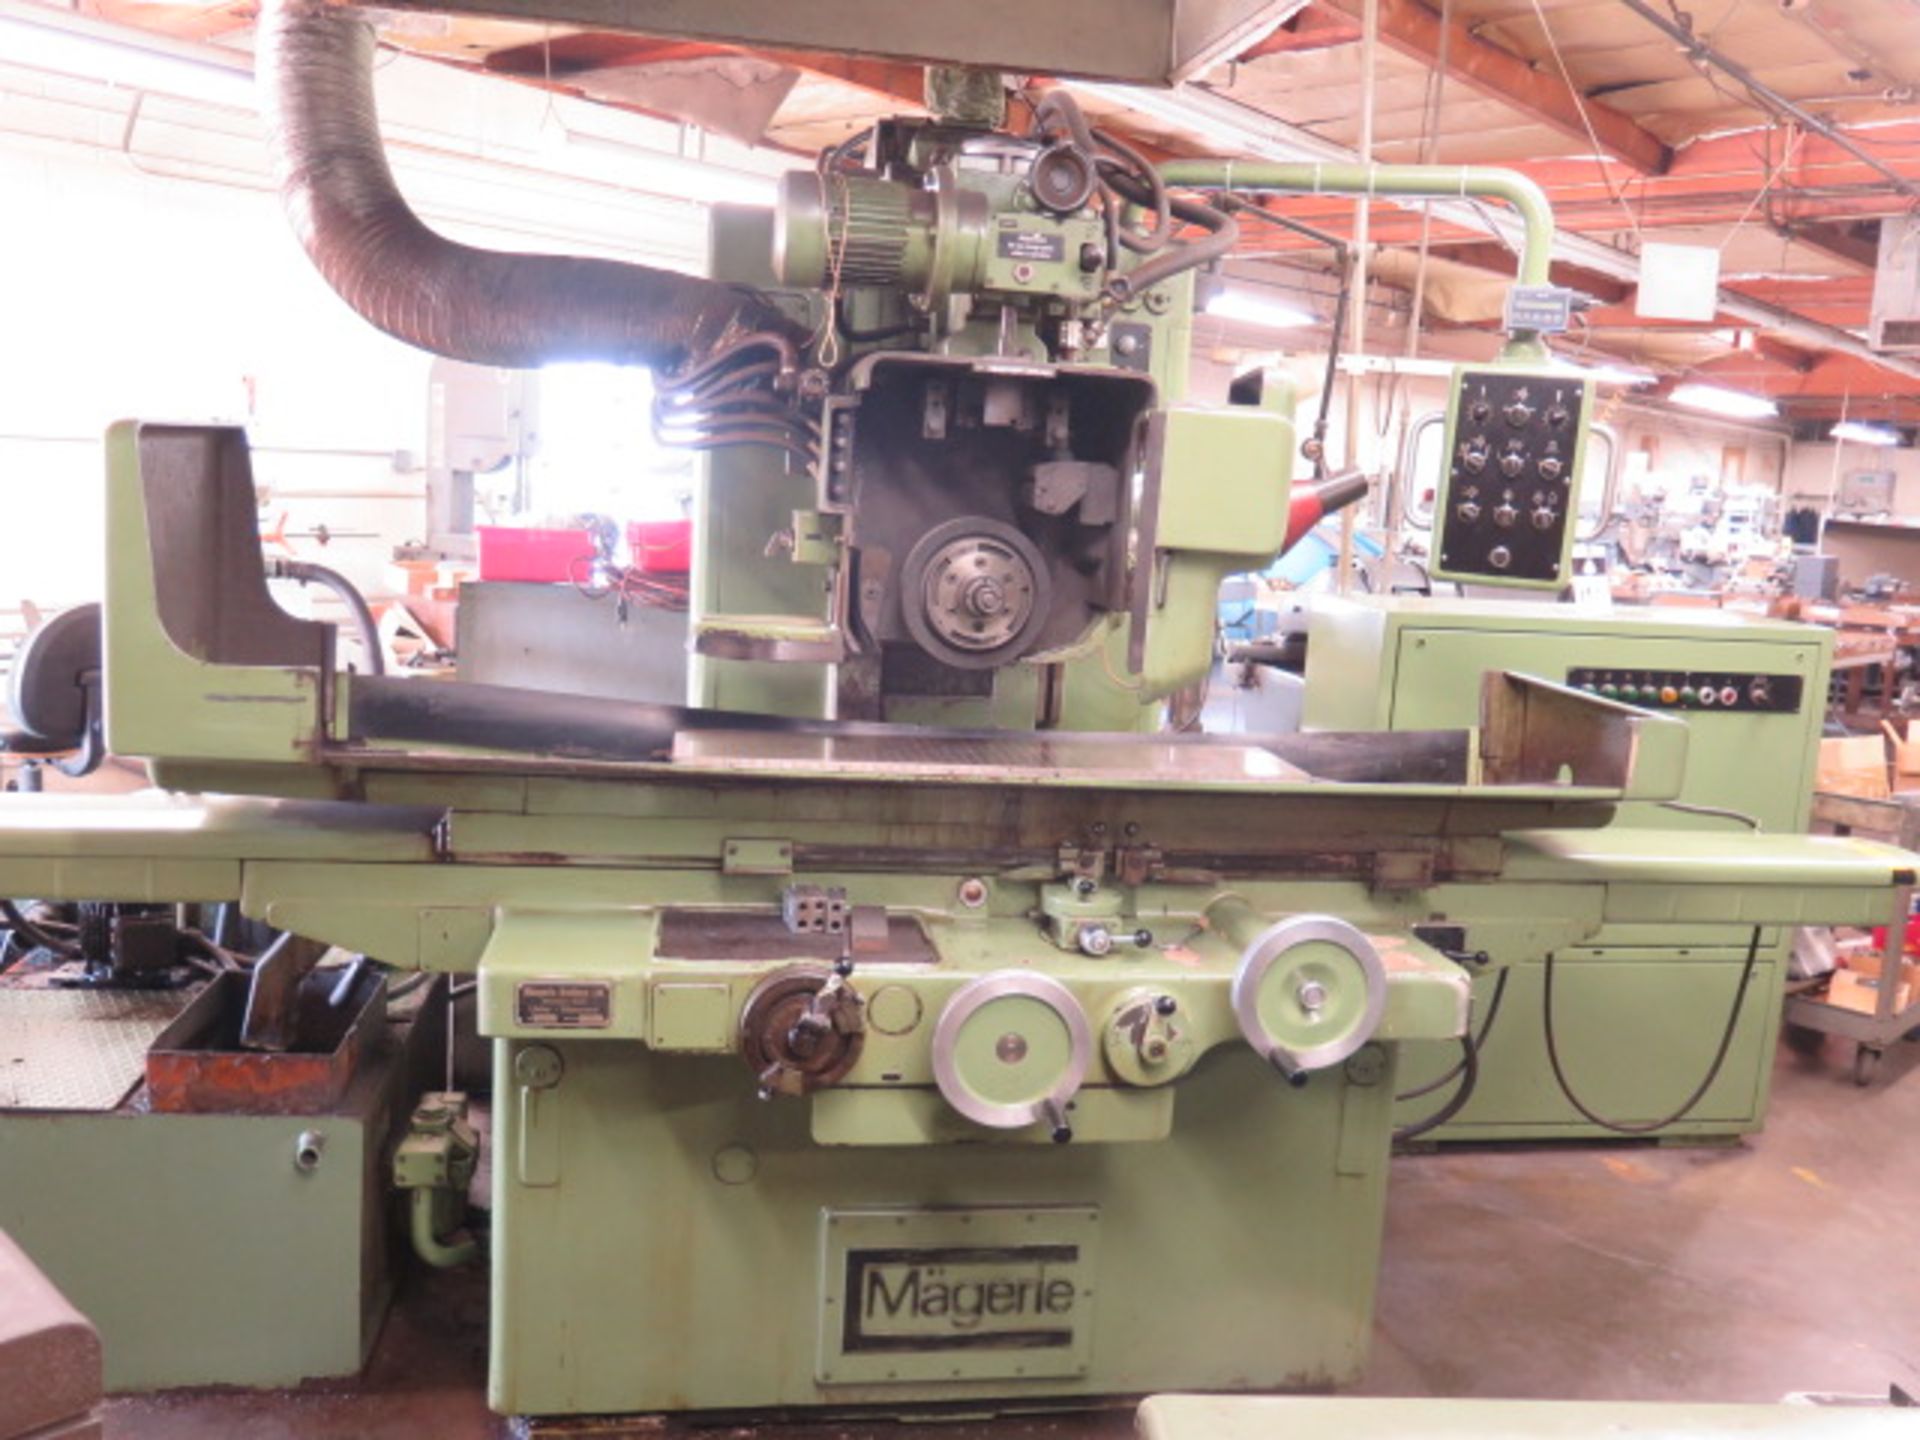 Magerle Type FP-10-S1 10" x 40" Auto Hydr Surface Grinder s/n 965 w/ Magerle Controls, SOLD AS IS